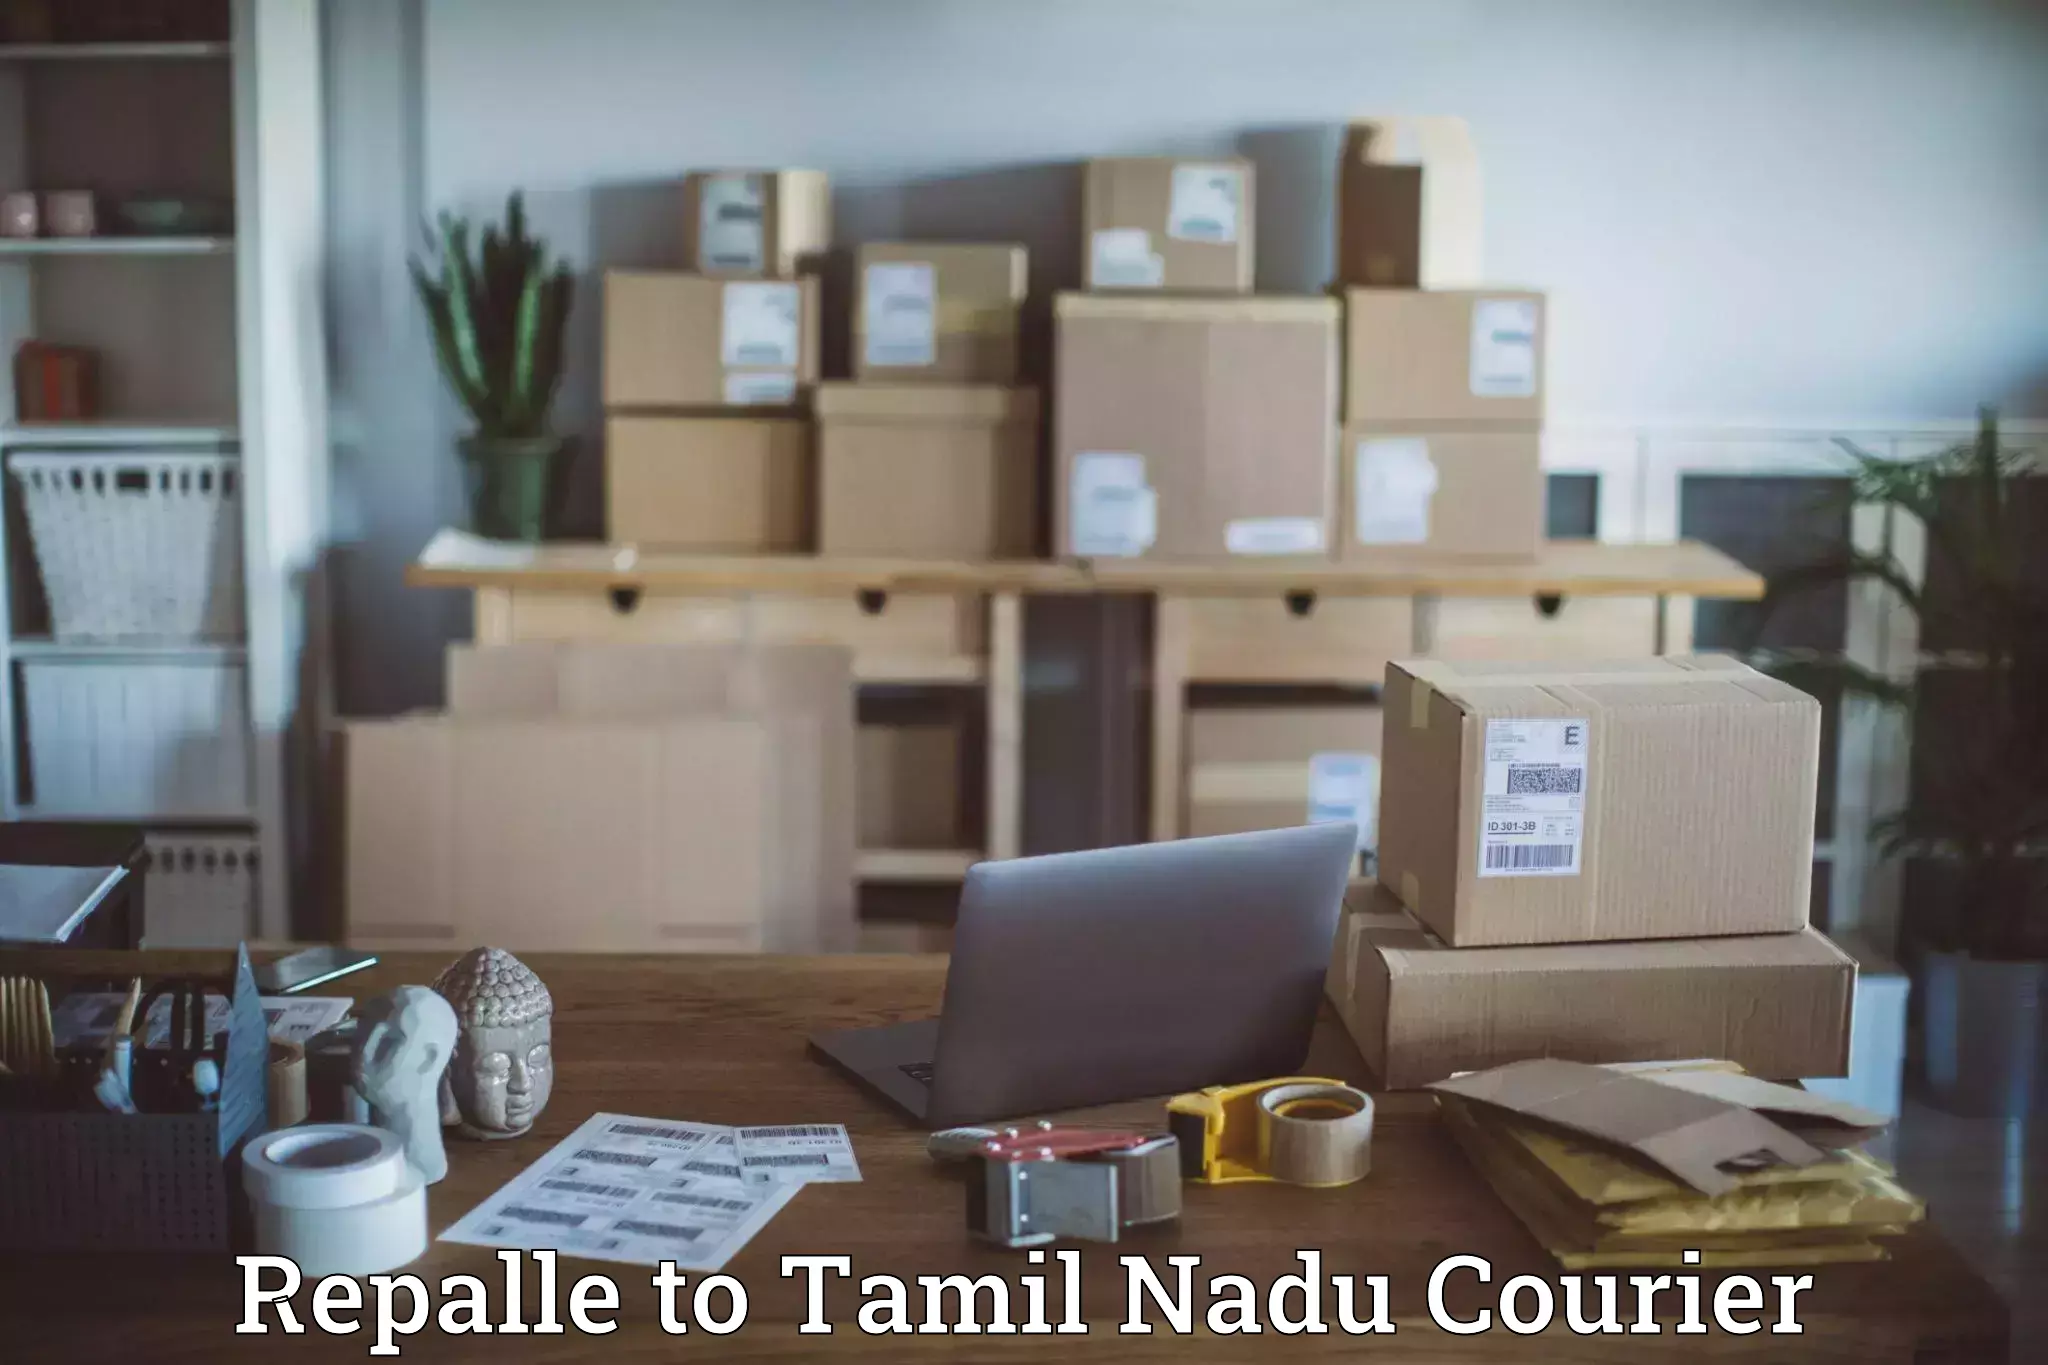 Discount courier rates Repalle to Tuticorin Port